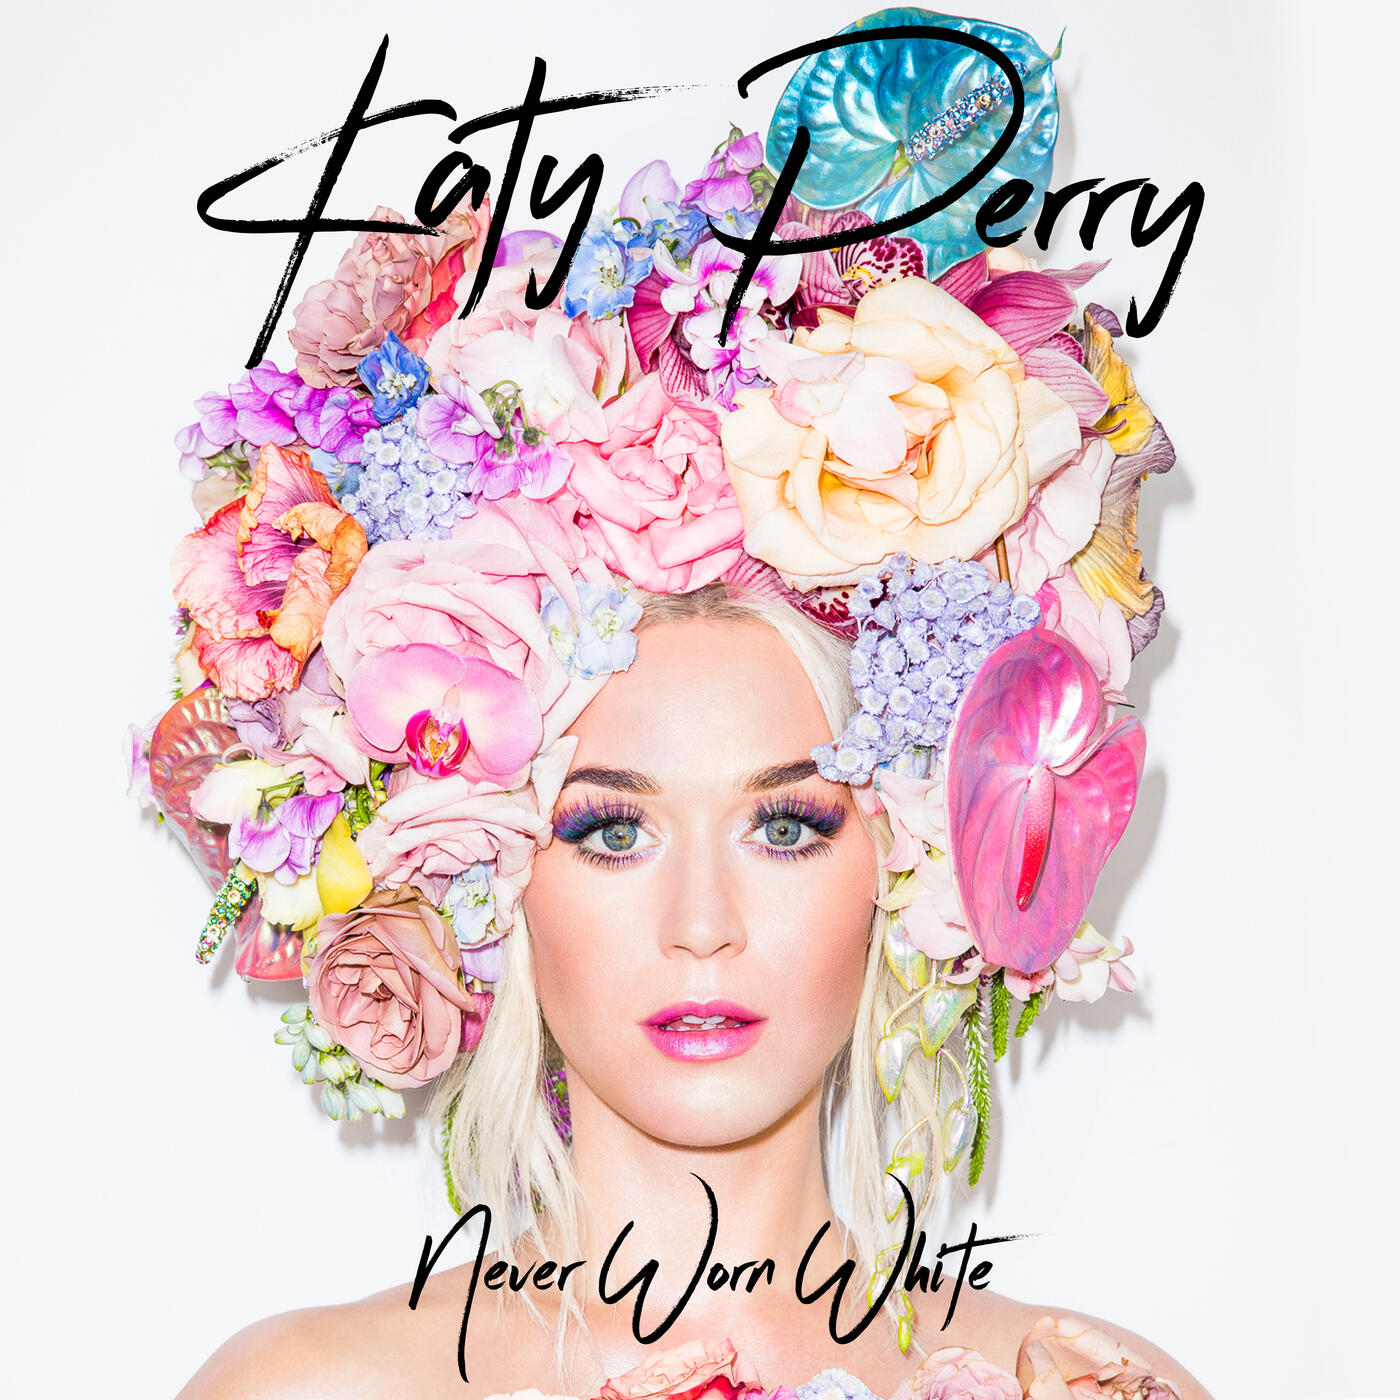 Stream Free Songs by Katy Perry & Similar Artists | iHeart